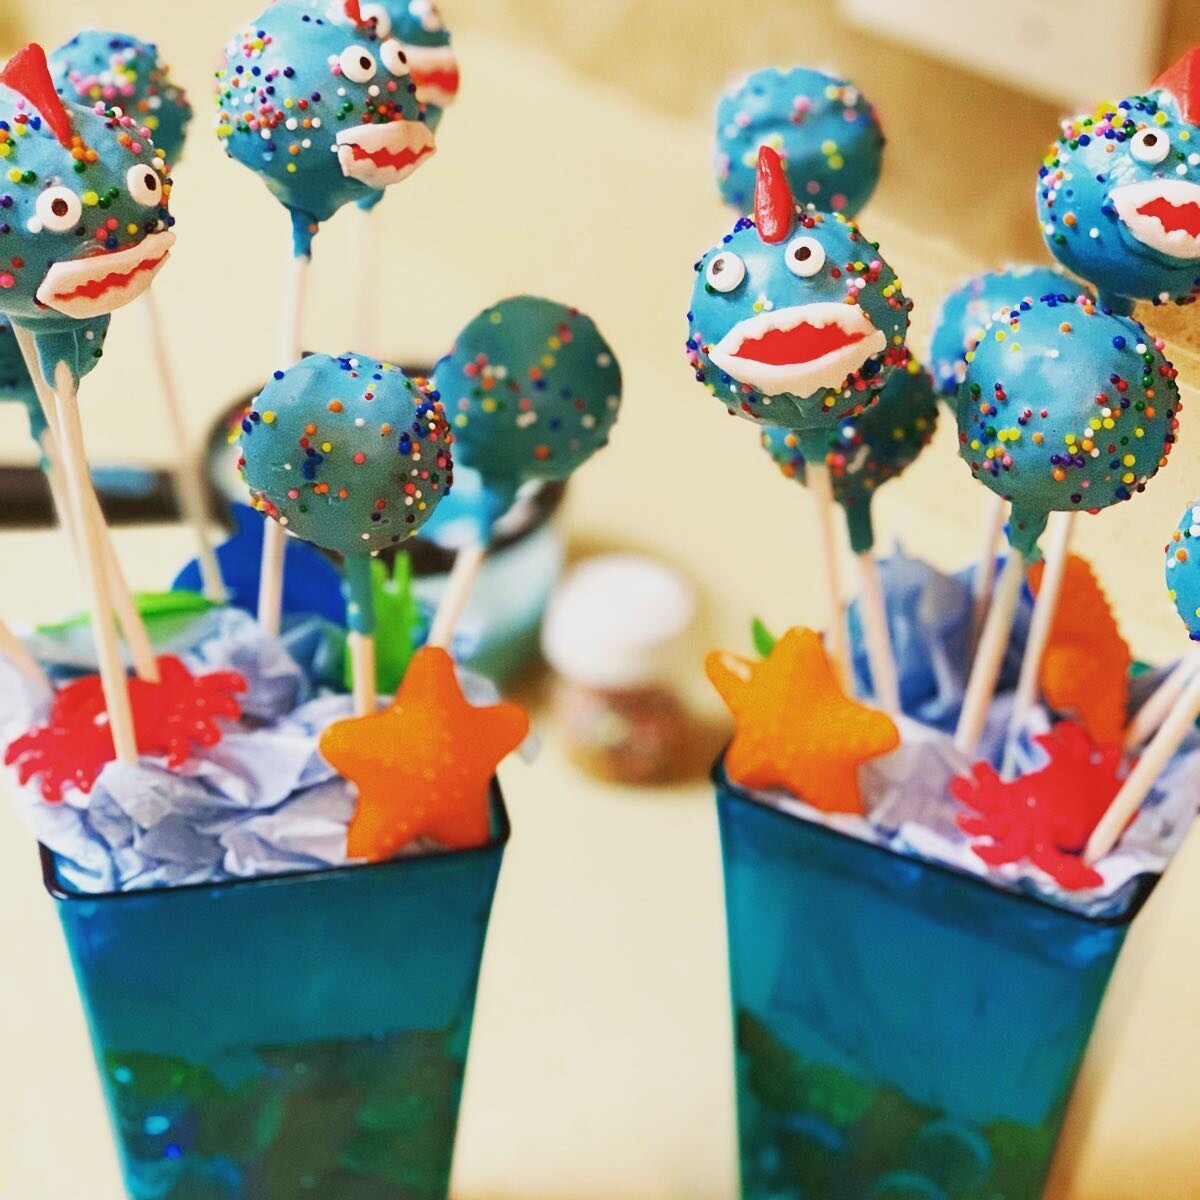 It&rsquo;s a SharkPop attack! Courtesy of the Fish Are Friends, Not Food Support Group! 🦈 Thanks Bruce! .
.
.
#baking #anageesbakes #anagees #bake #cake #bakery #baker #desserts #patisserie #cakepopsofinstagram #cakepops #dessertsofinstagram #sweett